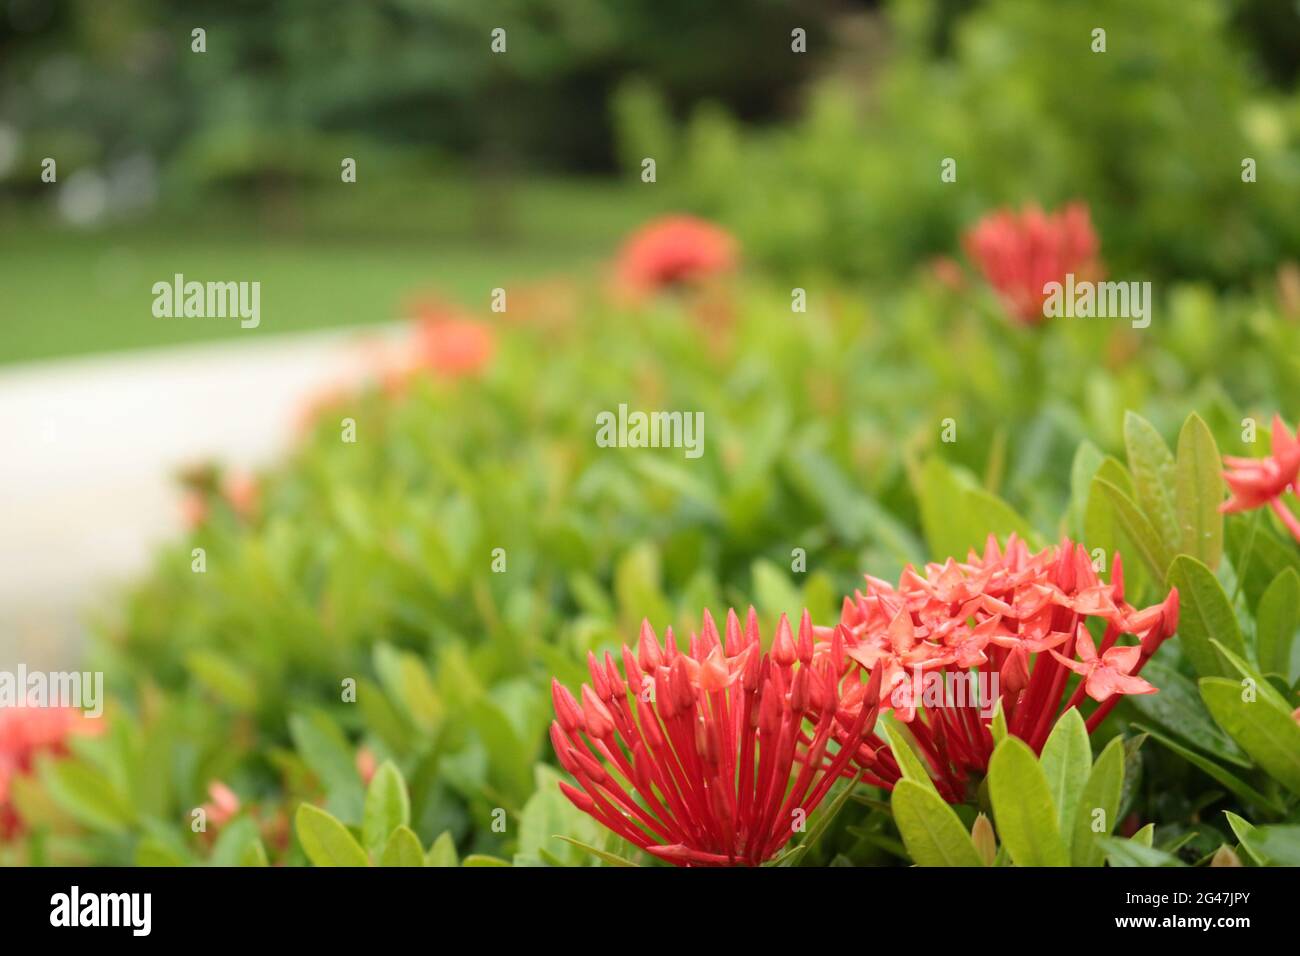 Beautiful red West Indian Jasmine (Ixora) flowers in the garden on a sunny day Stock Photo